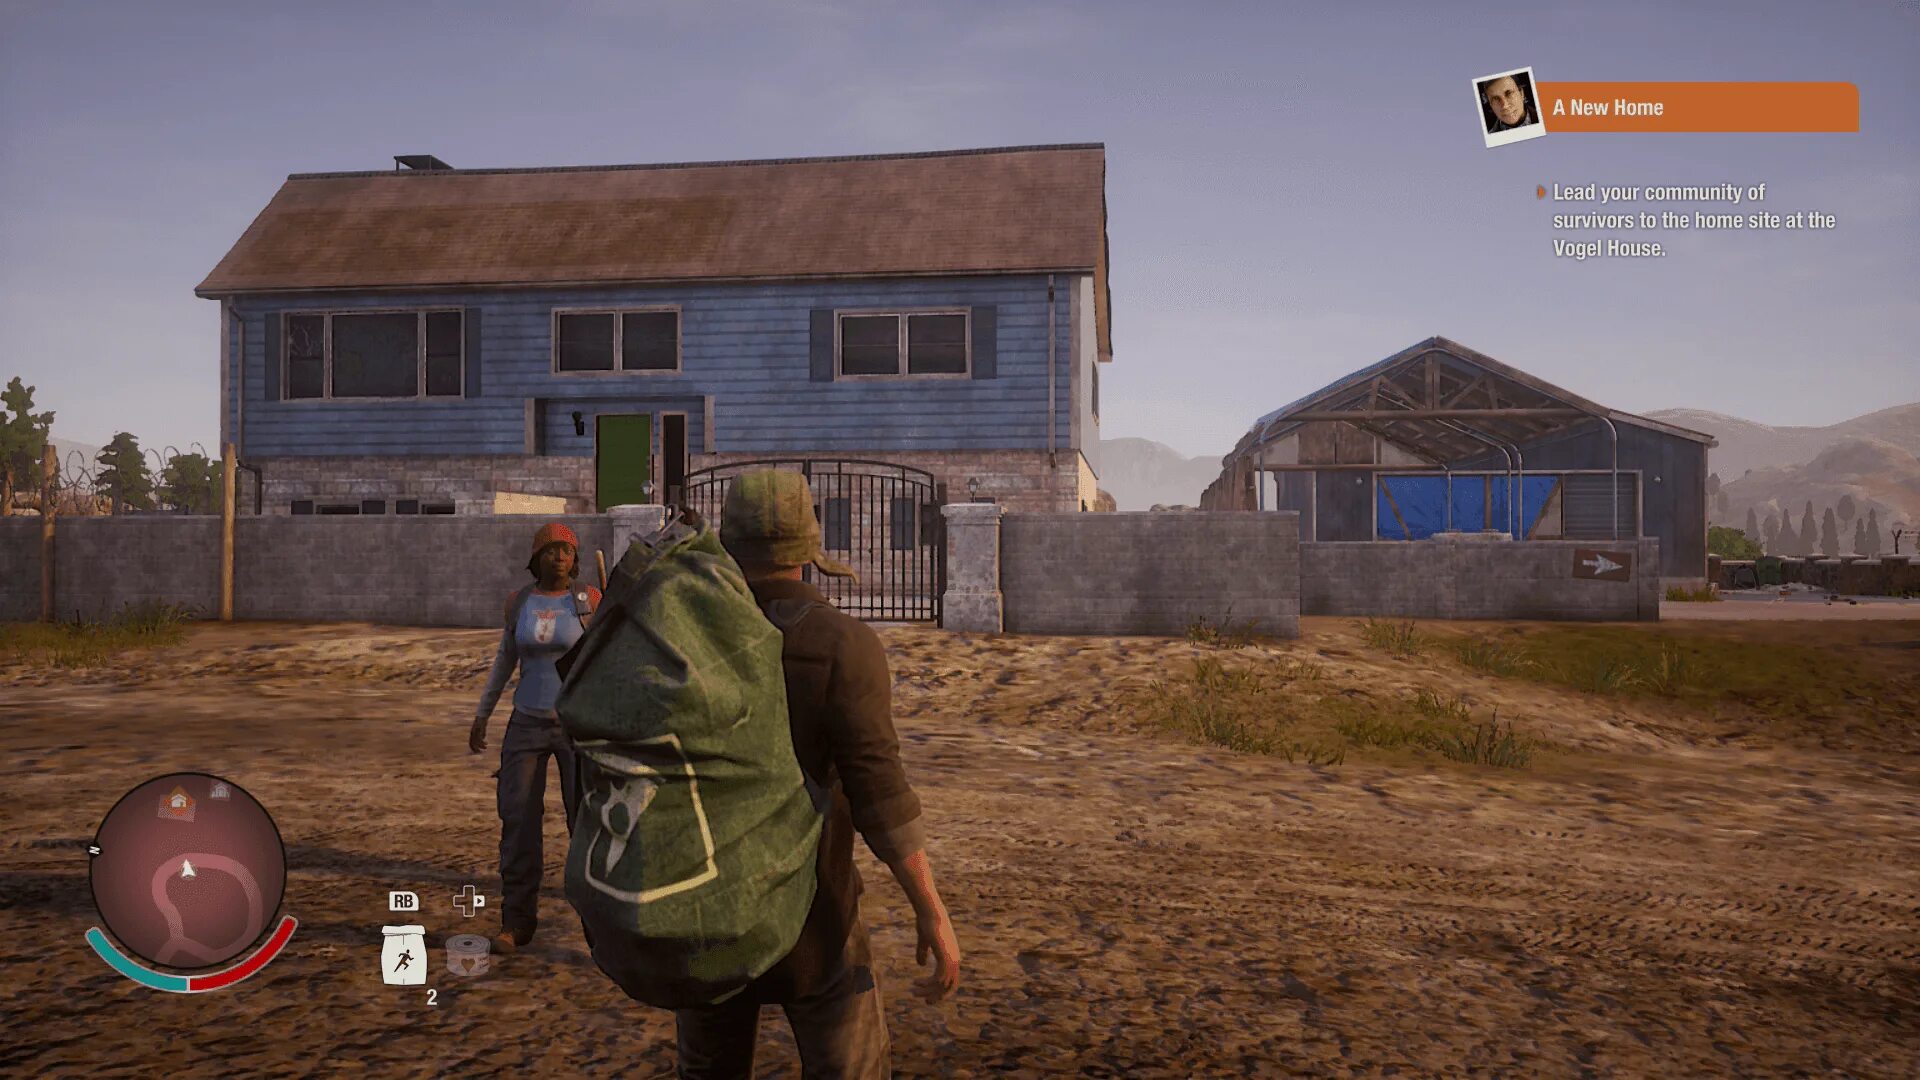 State of Decay 2. State of Decay 2 базы. State of Decay 2 база. Базы в Стейт оф Дикей 2.